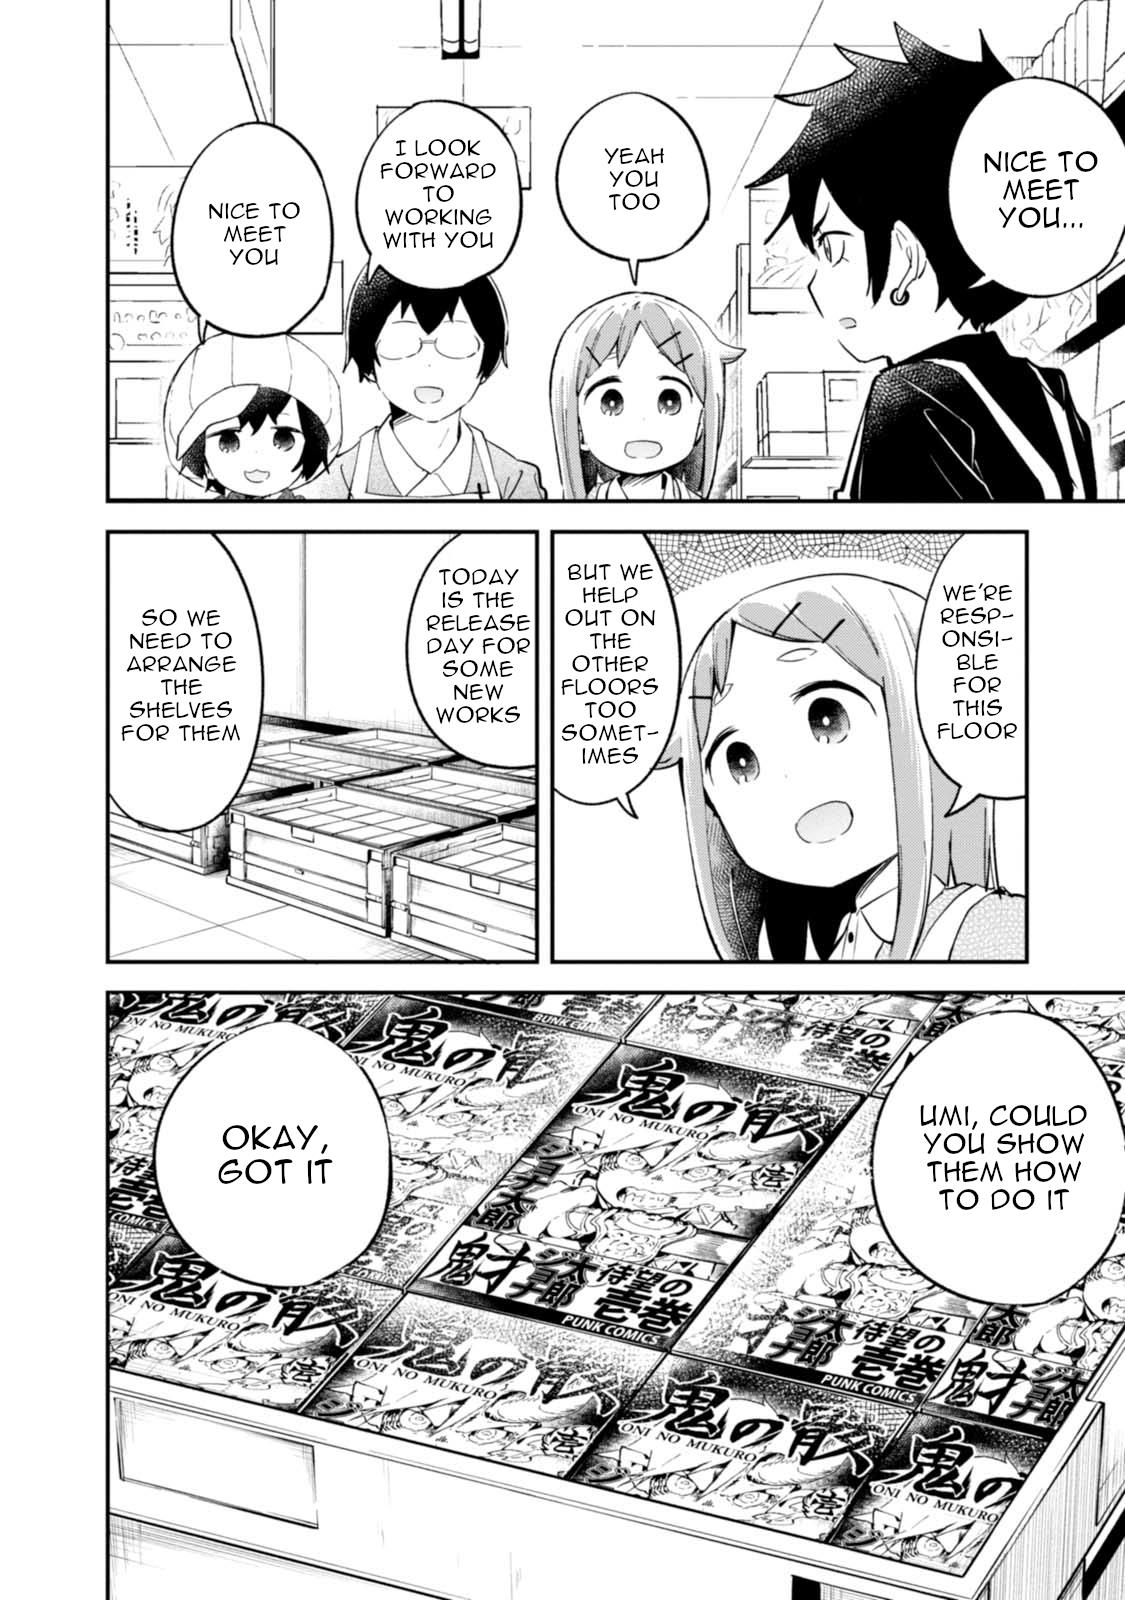 Denkigai No Honya-San Vol.15 Chapter 94: The Passage Of Time - Picture 2